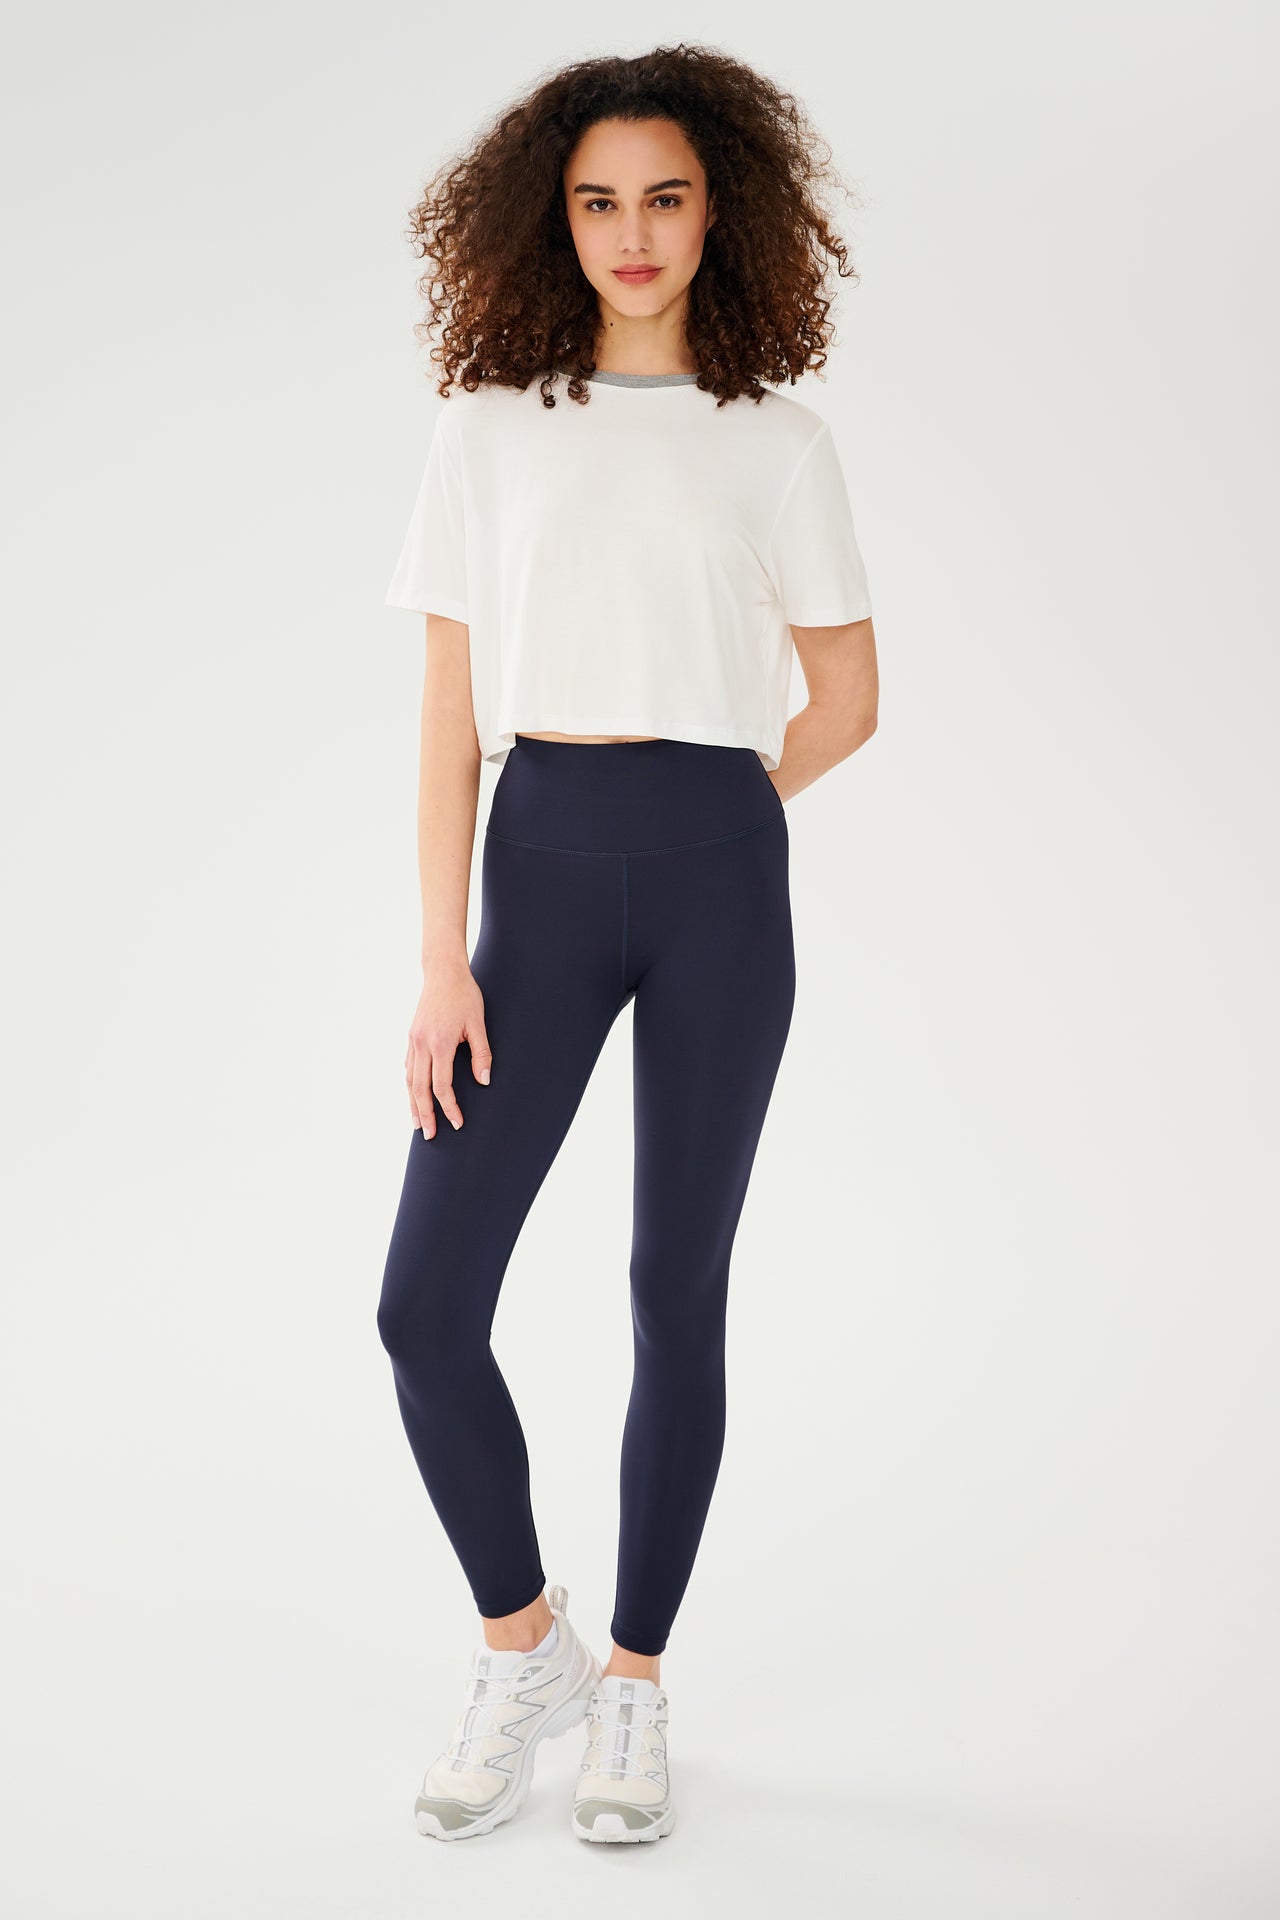 Full front view of girl wearing white cropped short sleeve t-shirt with thin light grey neck hem and dark blue leggings with white shoes